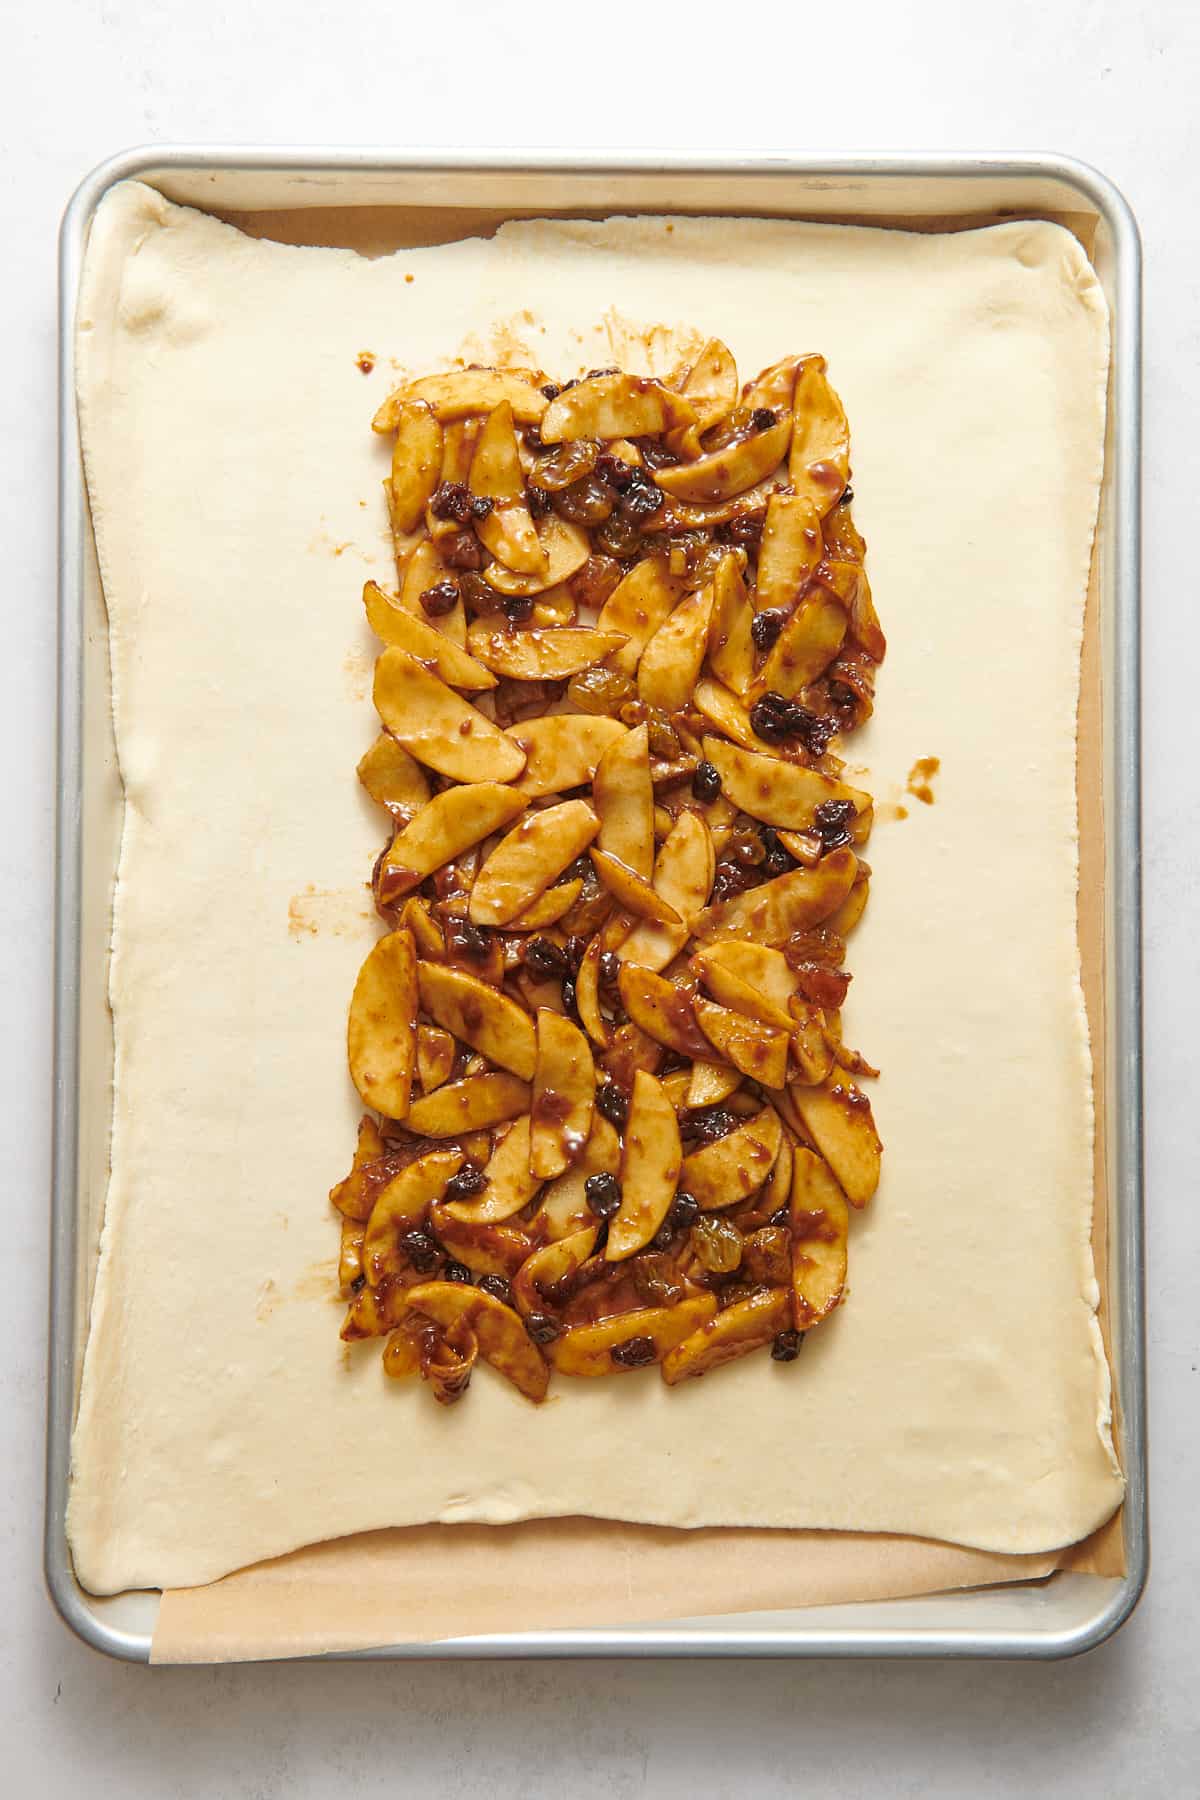 pastry dough lined on a baking tray with parchment paper layered with apple strudel filling